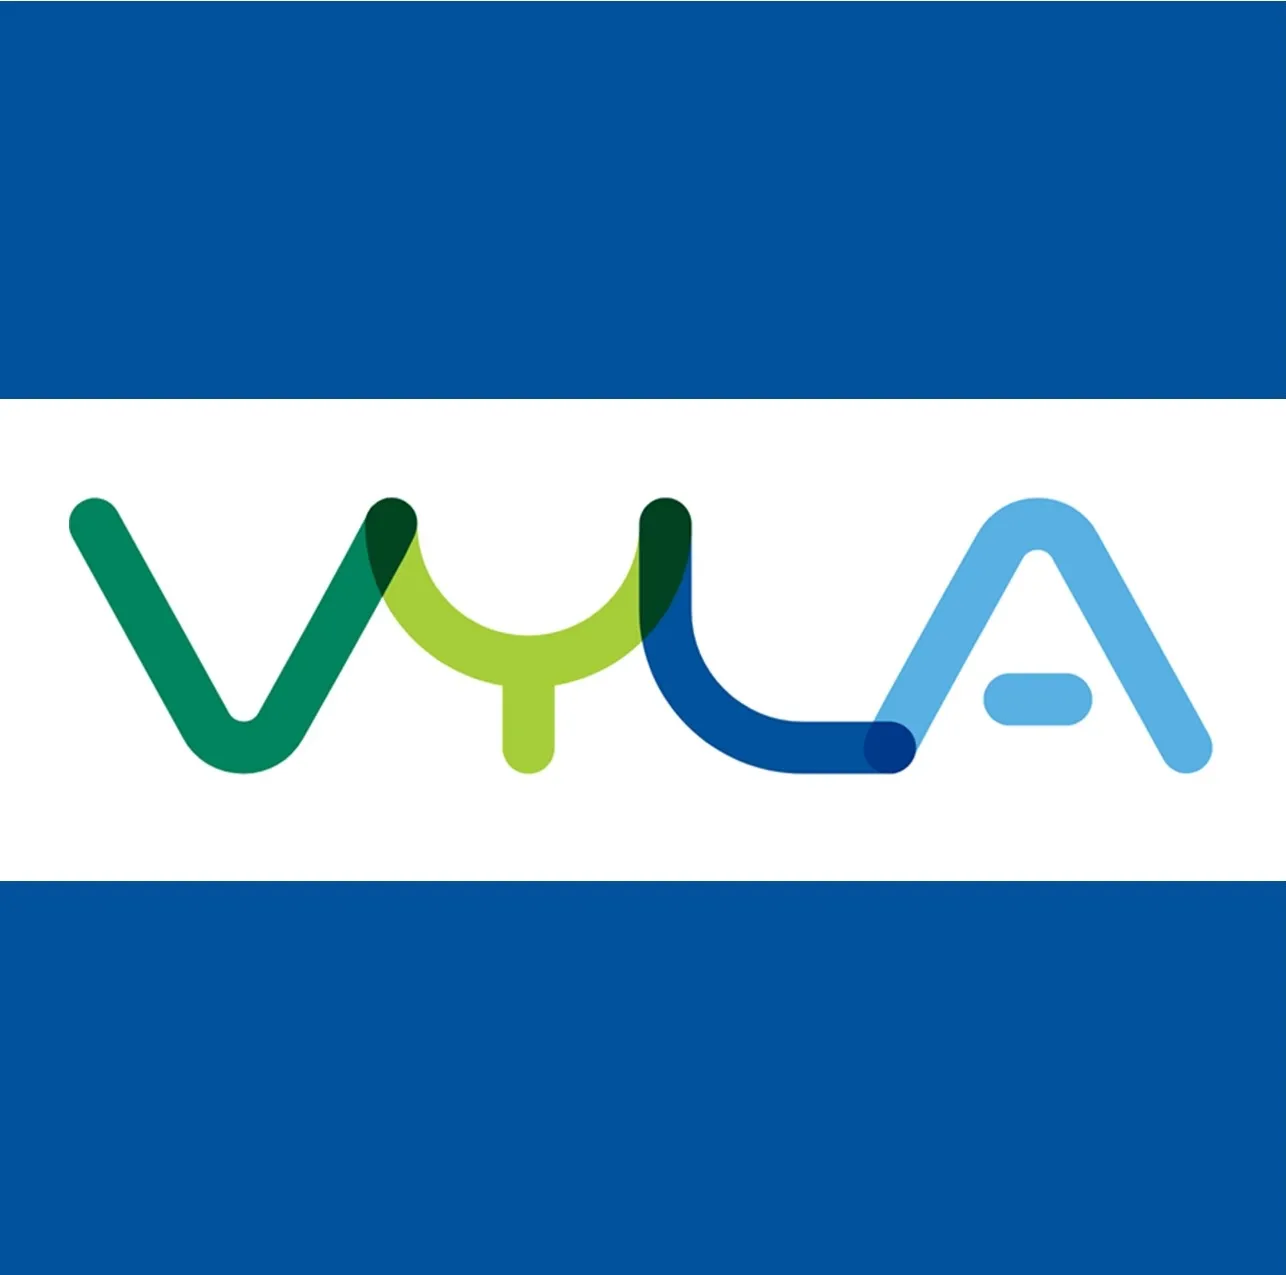 LWR PARTNERS WITH VYLA TO CONNECT MANURE DATA WITH DAIRY STAKEHOLDERS FOR INCREASED TRANSPARENCY AND SUSTAINABILITY